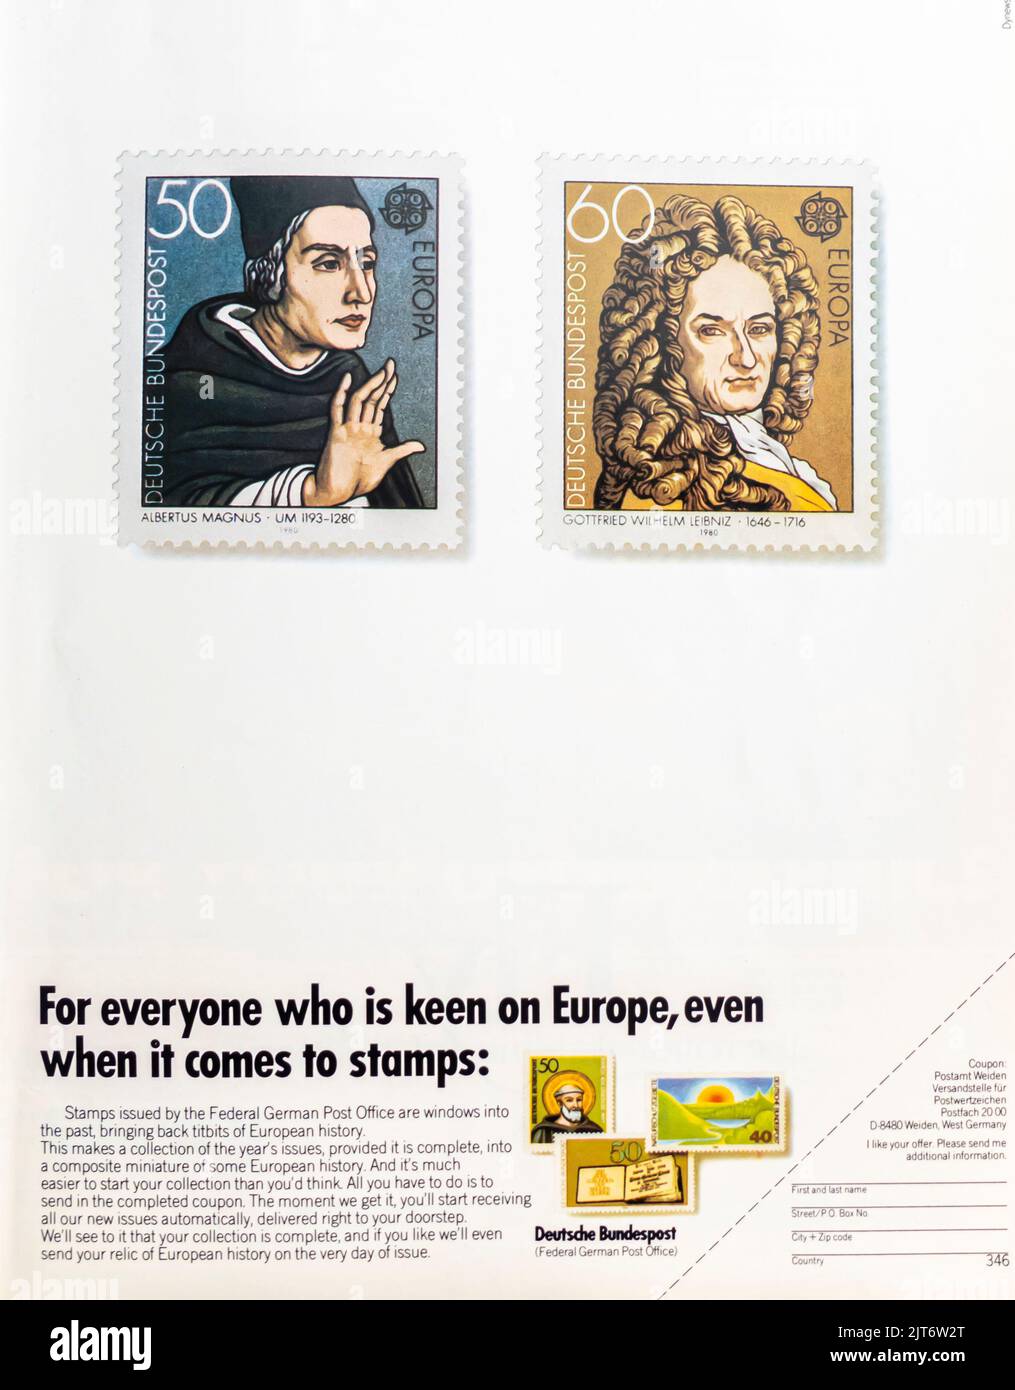 mail / post, stamps, West Germany, Deutsche Bundespost, 60, 120 and 80  Pfennig special issue stamps, printed on occasion of the 19th World Post  Congress, Hamburg, 1984, portrait of Heinrich von Stephan